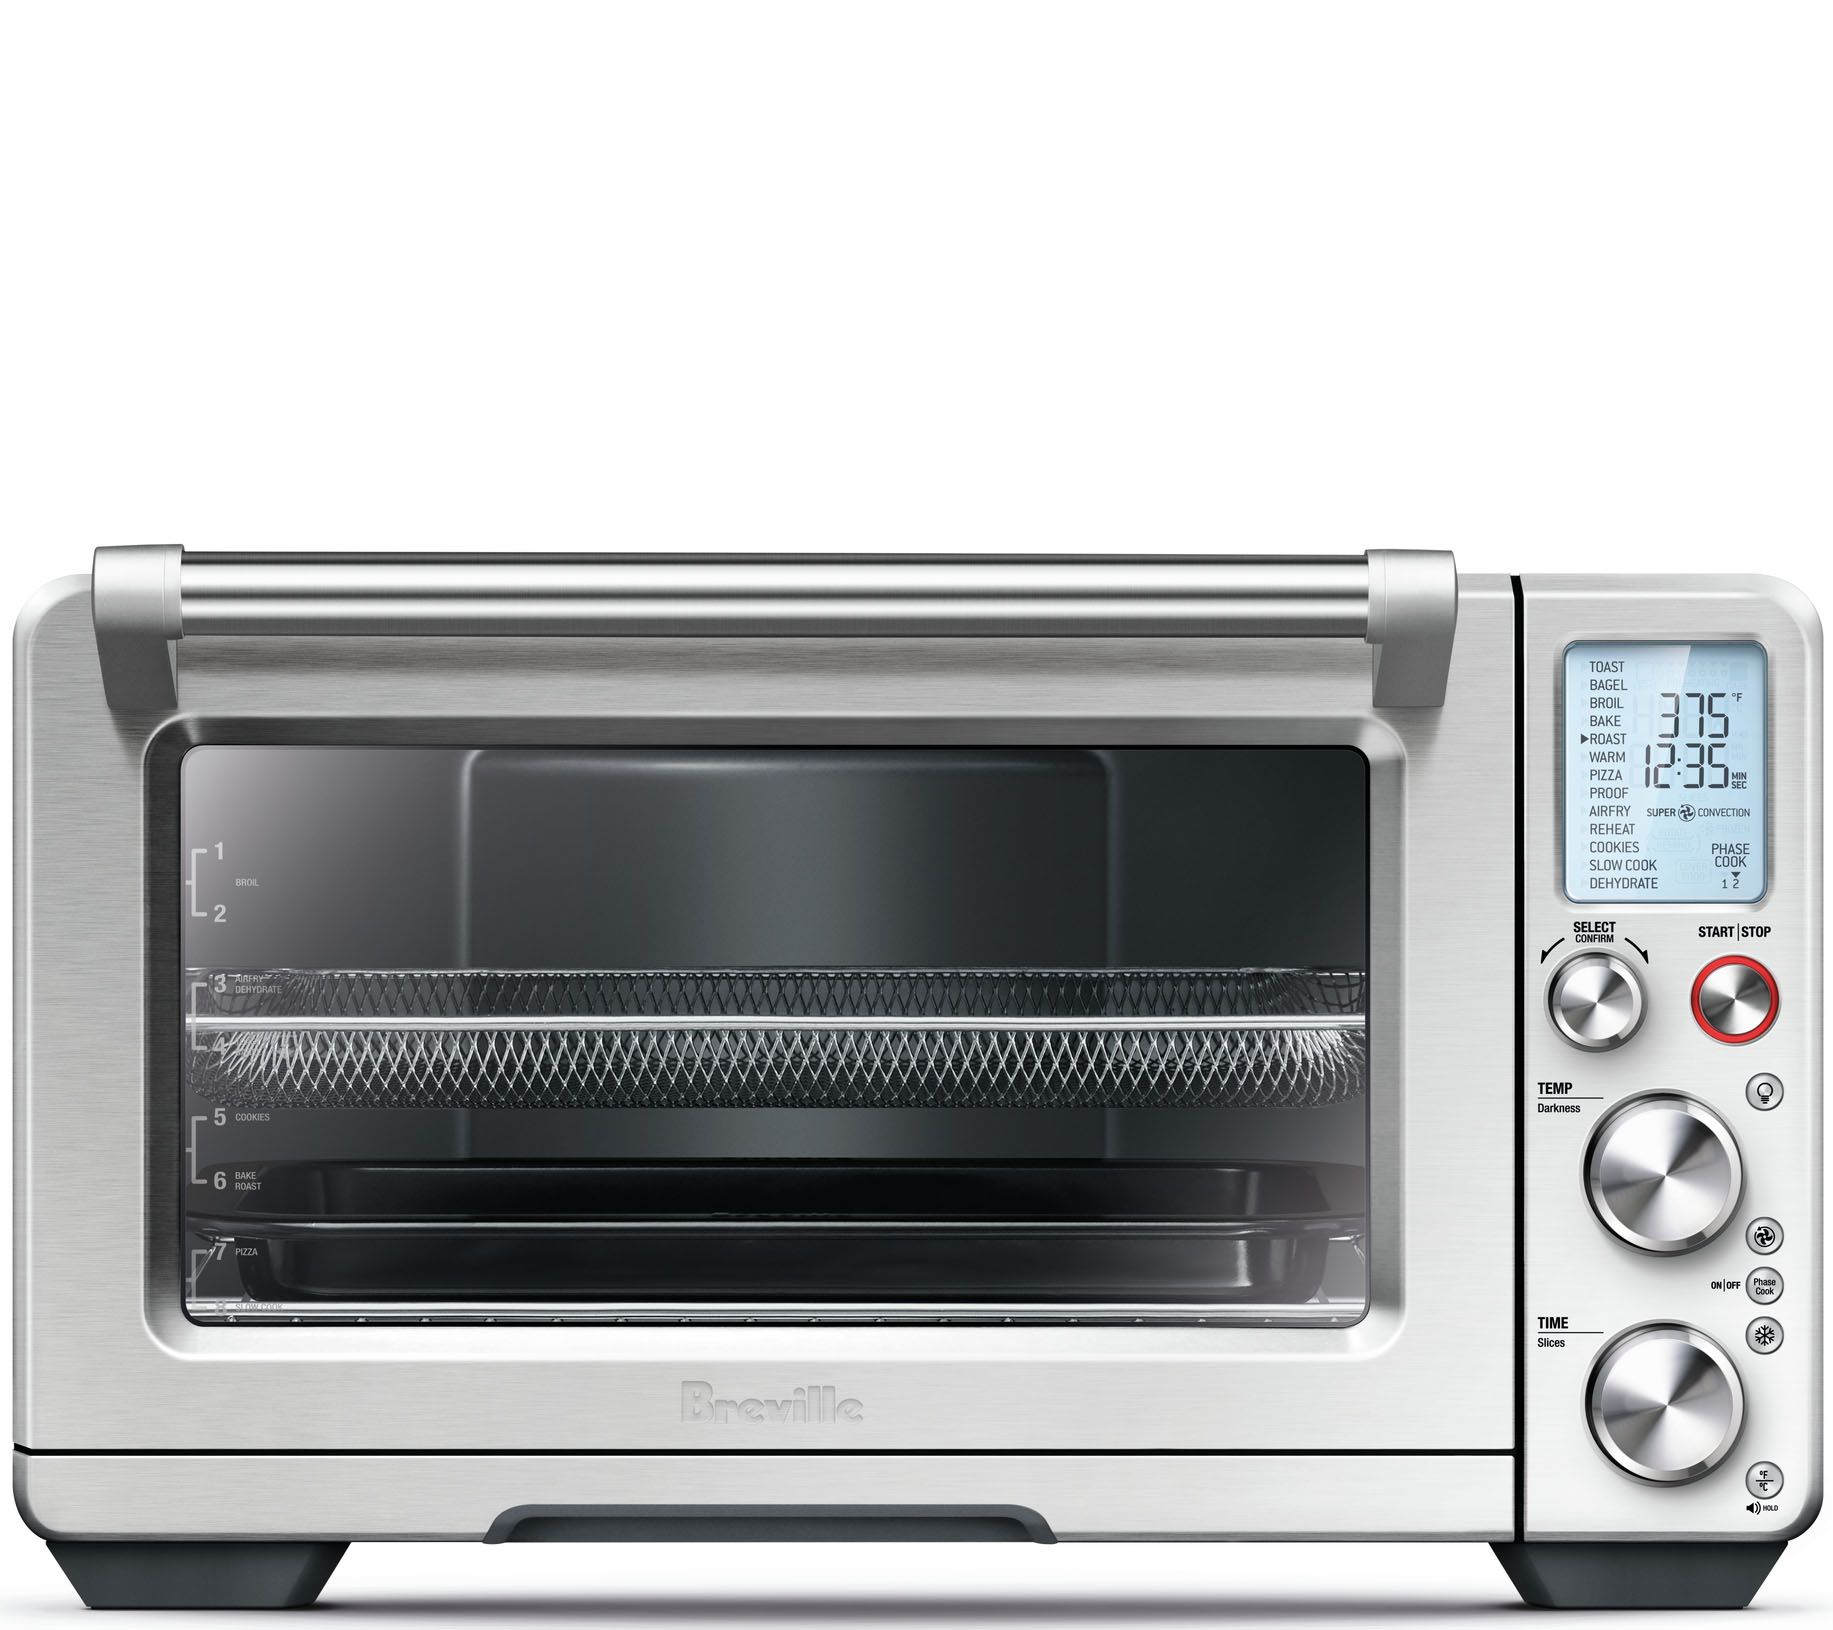 QVC Ninja 12-in-1 Rapid Cook & Convection Double Oven 329.98